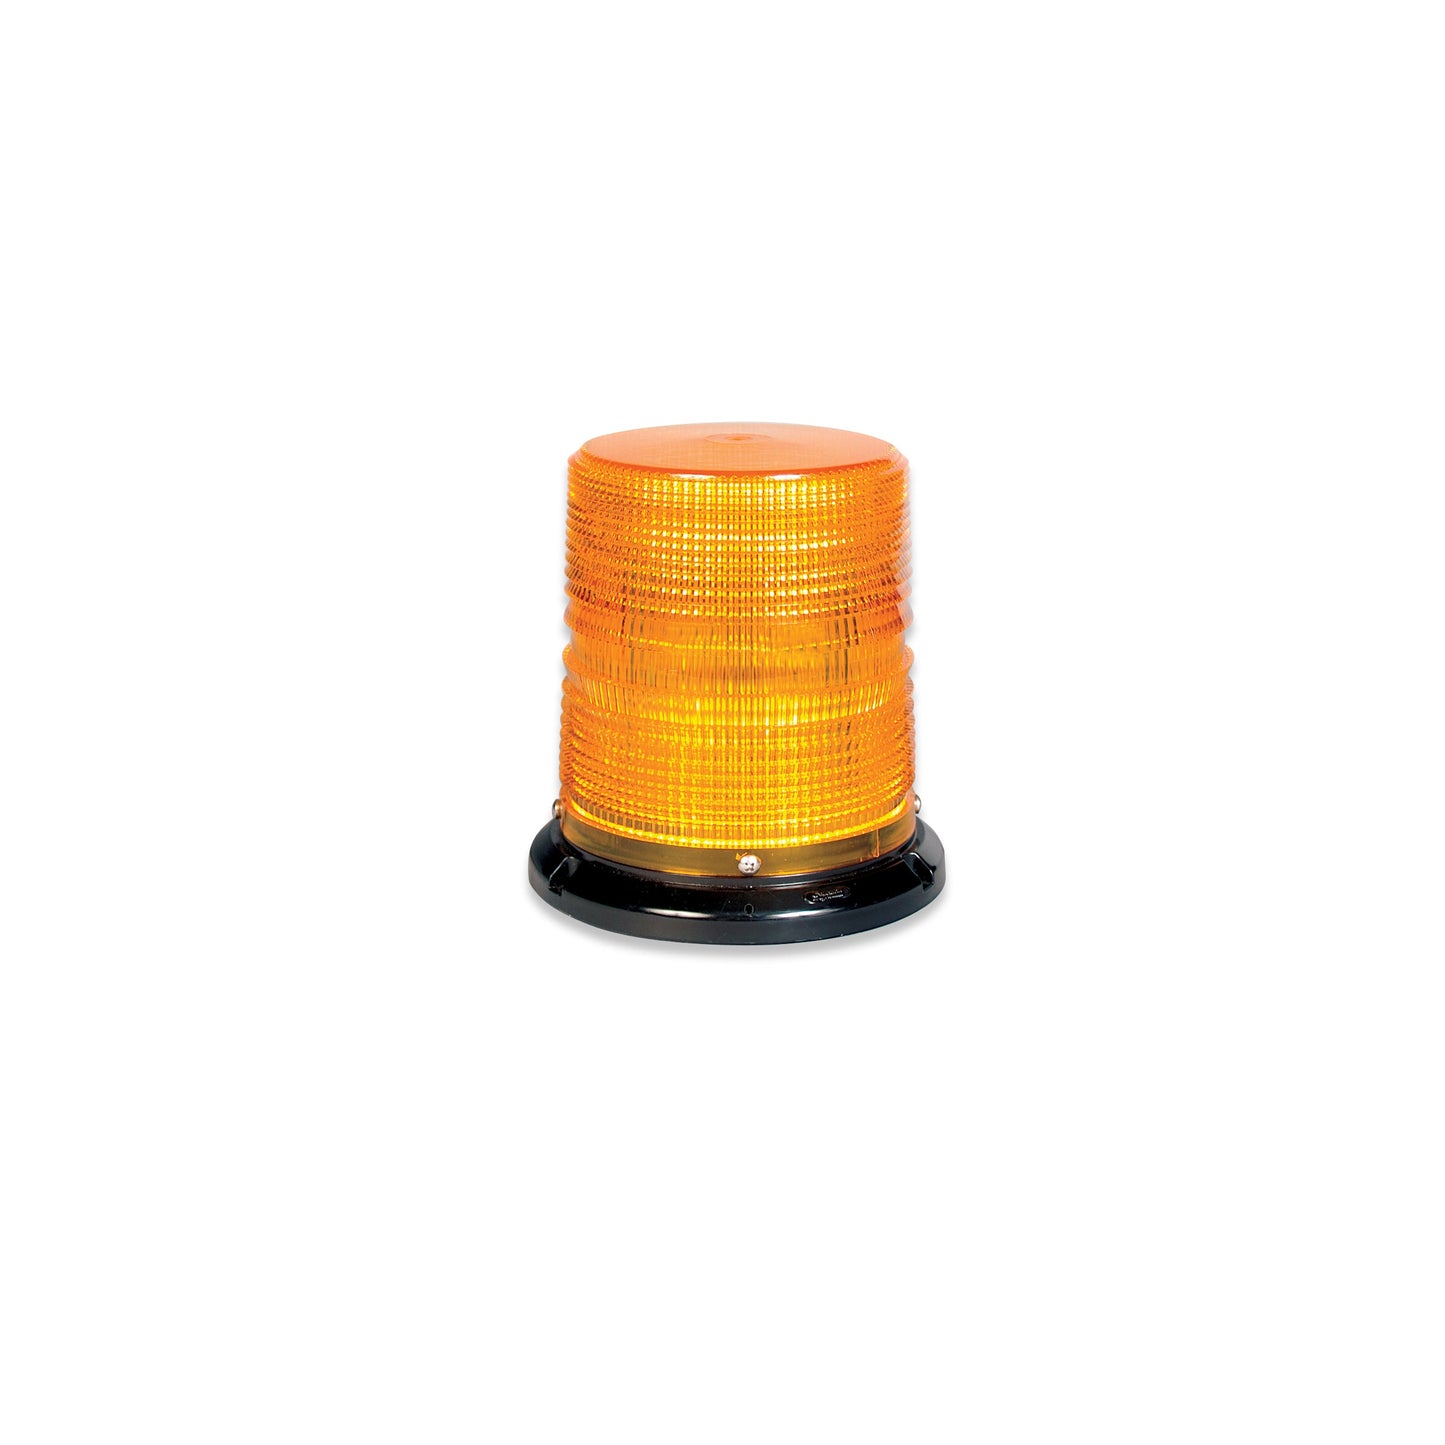 Soundoff Signal ELB45BCH0WC 4500 Series Led Beacon, 10-30V, Sae J845 Class 1 - Flat/Pipe Mount, 6" Clear Dome/ White Leds